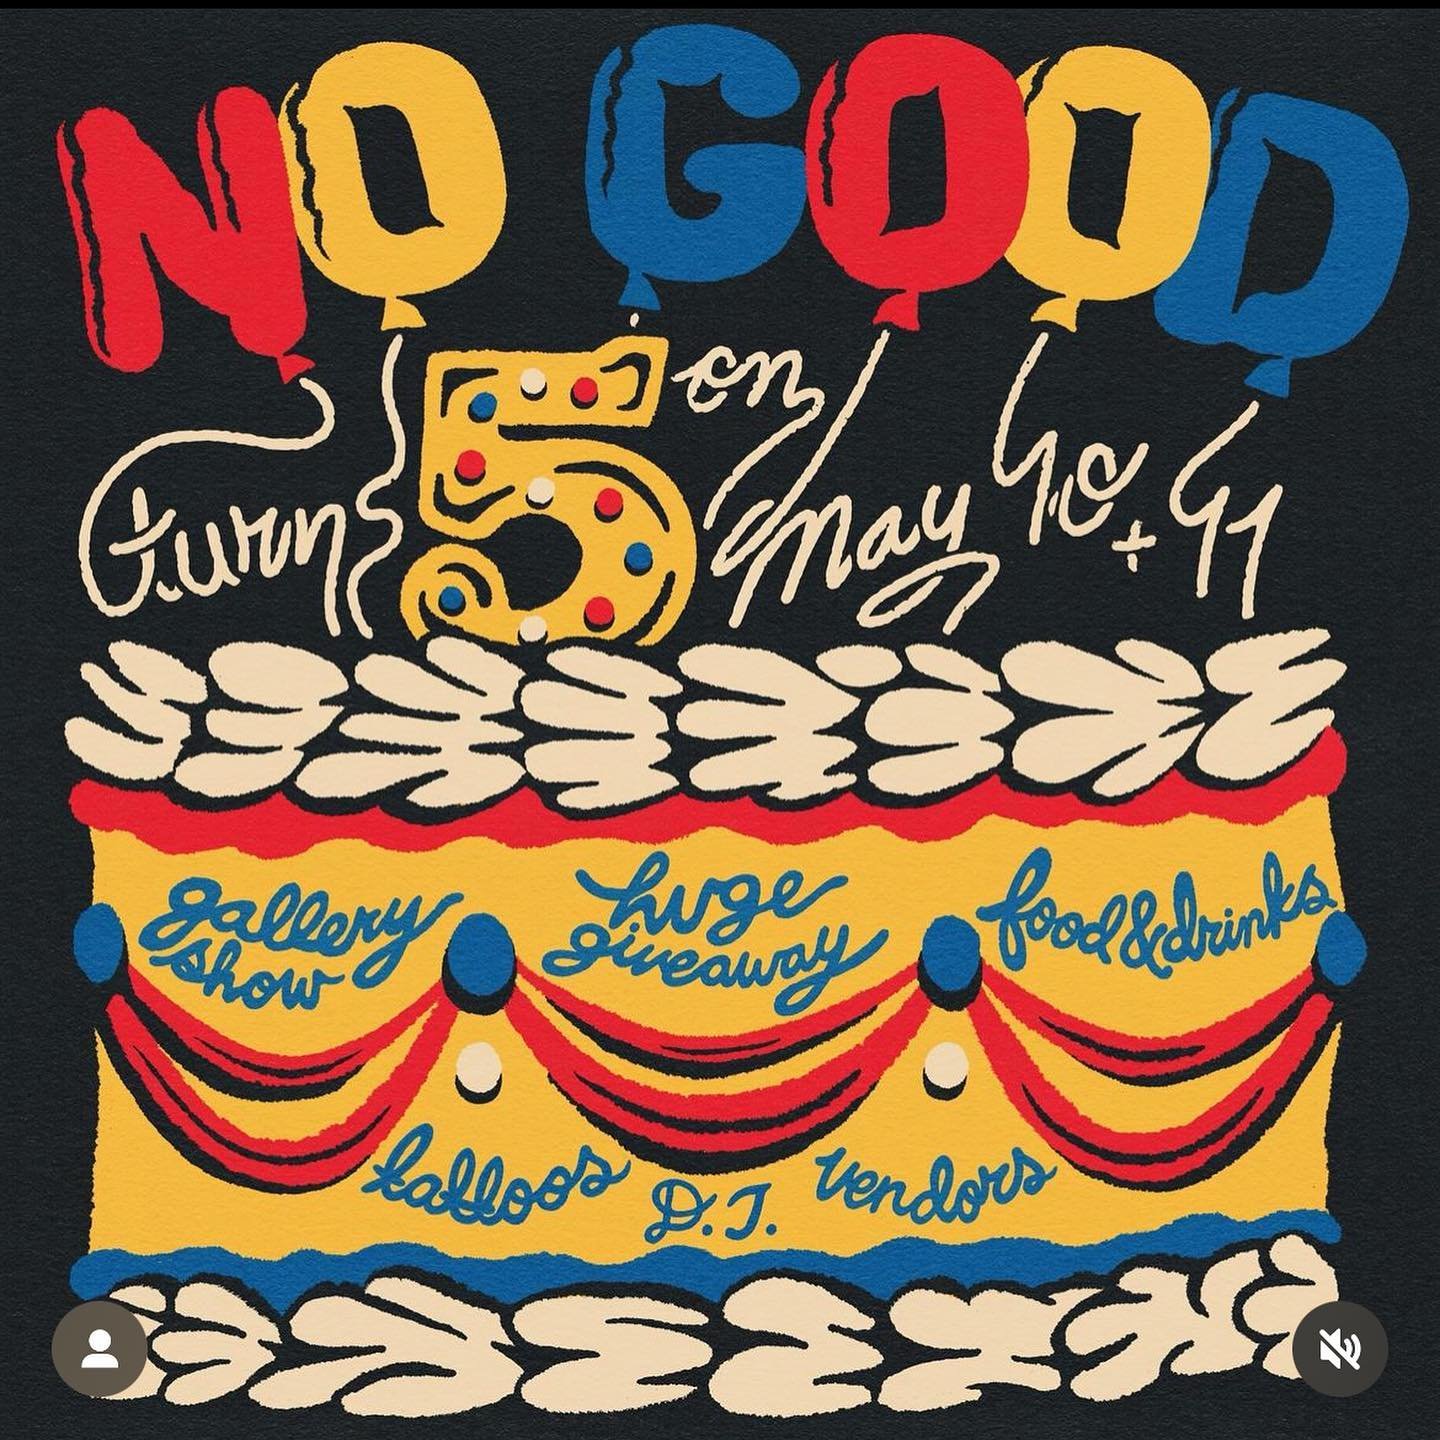 Celebrate local art and business May 11th with @nogoodtattoo for their 5th Anniversary Party! This event has it all - a bouncy house, free drinks, curated vendors, food pop ups, live djs, flash tattoos and a petting zoo! Mark your calendars!